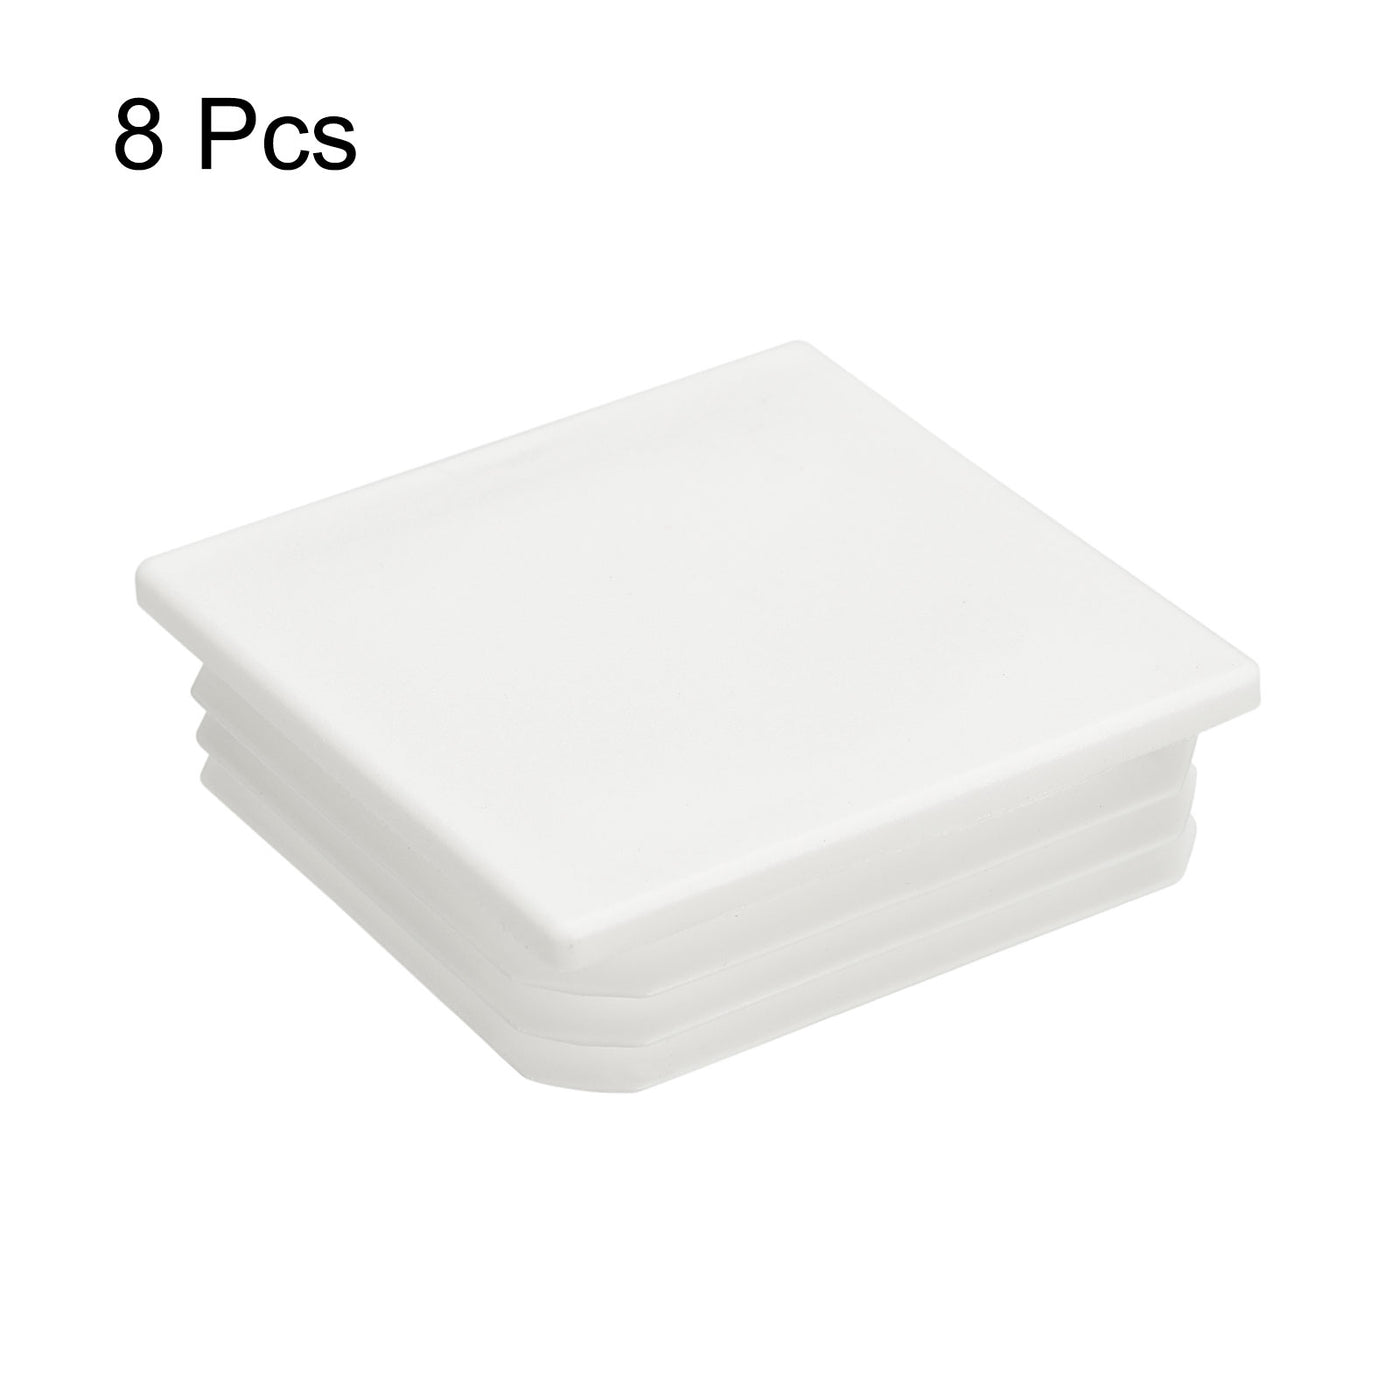 uxcell Uxcell 8Pcs 70mmx70mm(2.76inch) Plastic Tubing Plug Square Post End Caps White